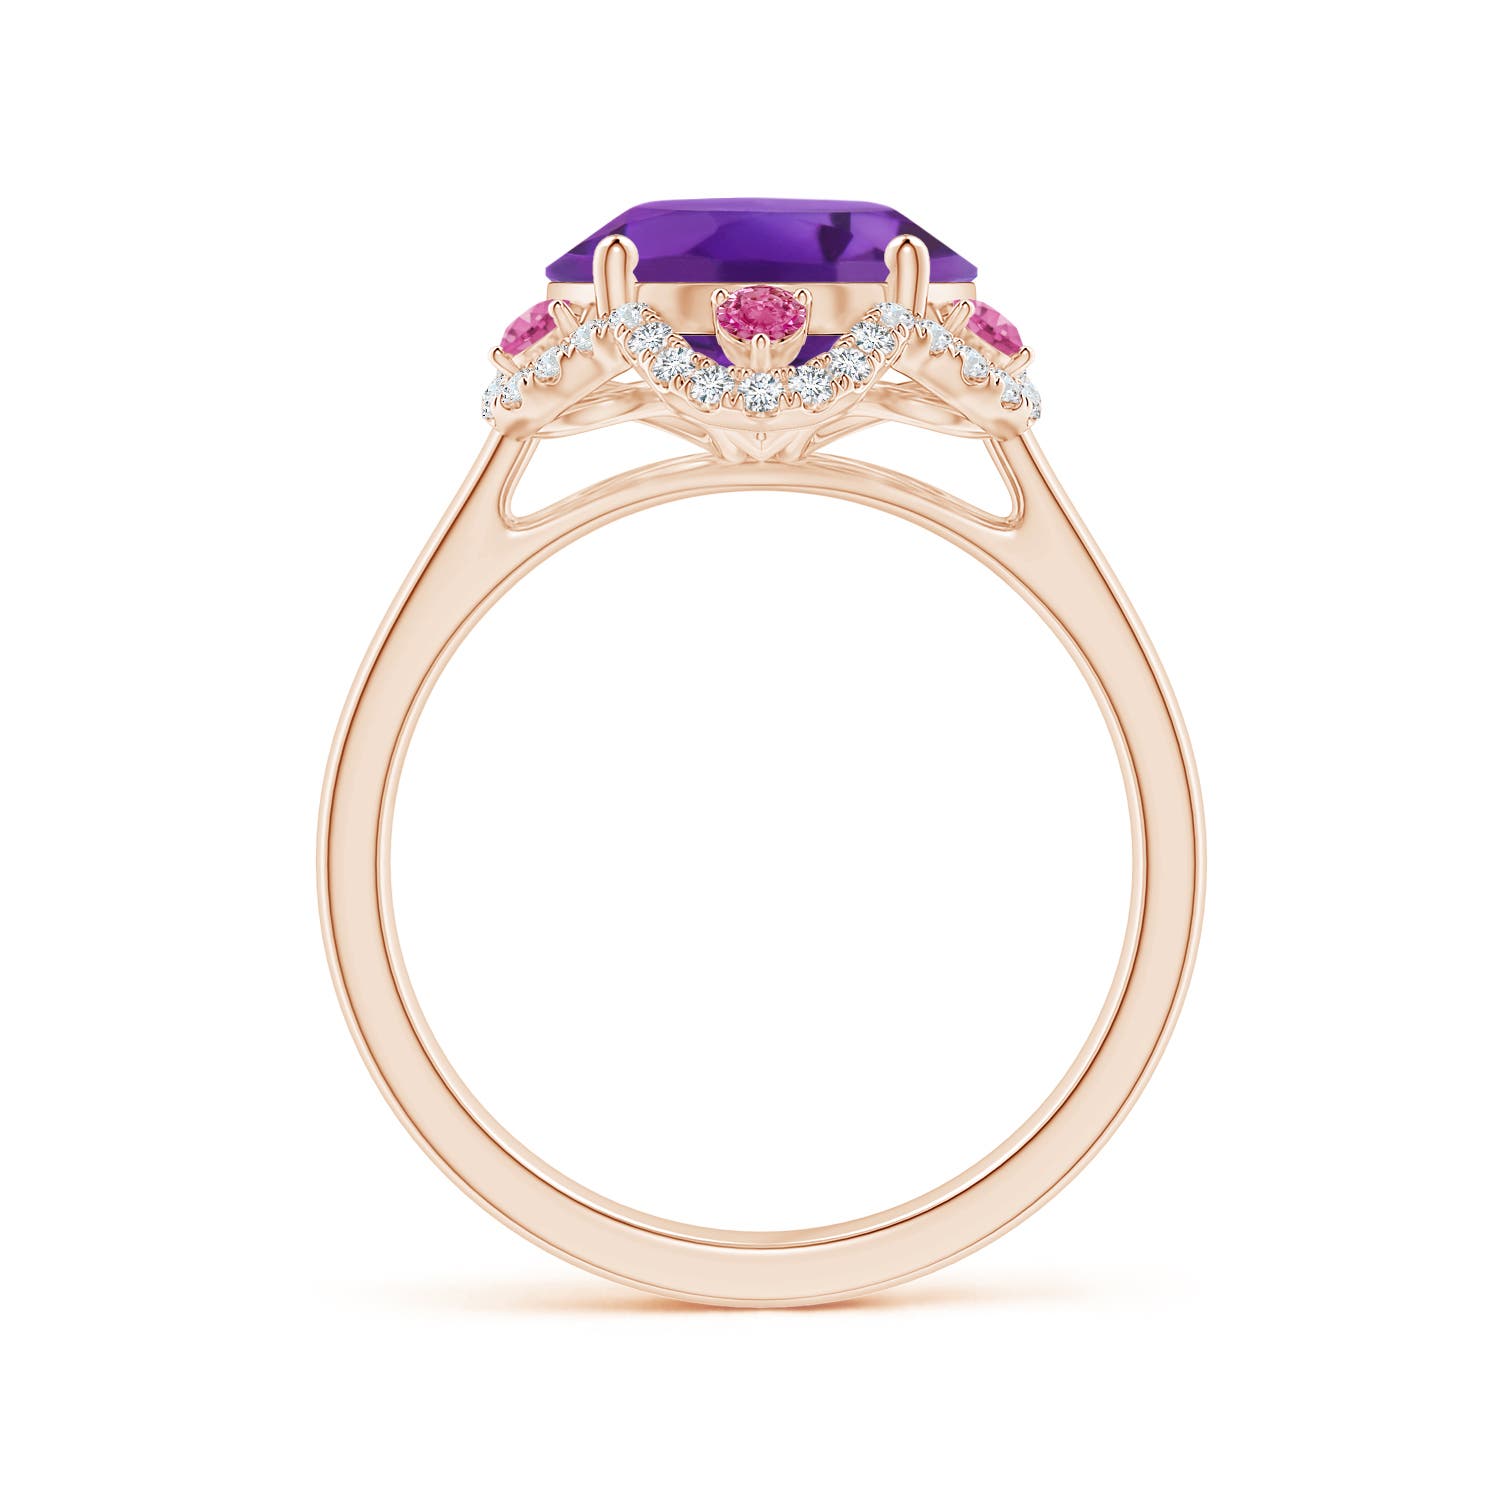 AAA - Amethyst / 4.76 CT / 14 KT Rose Gold